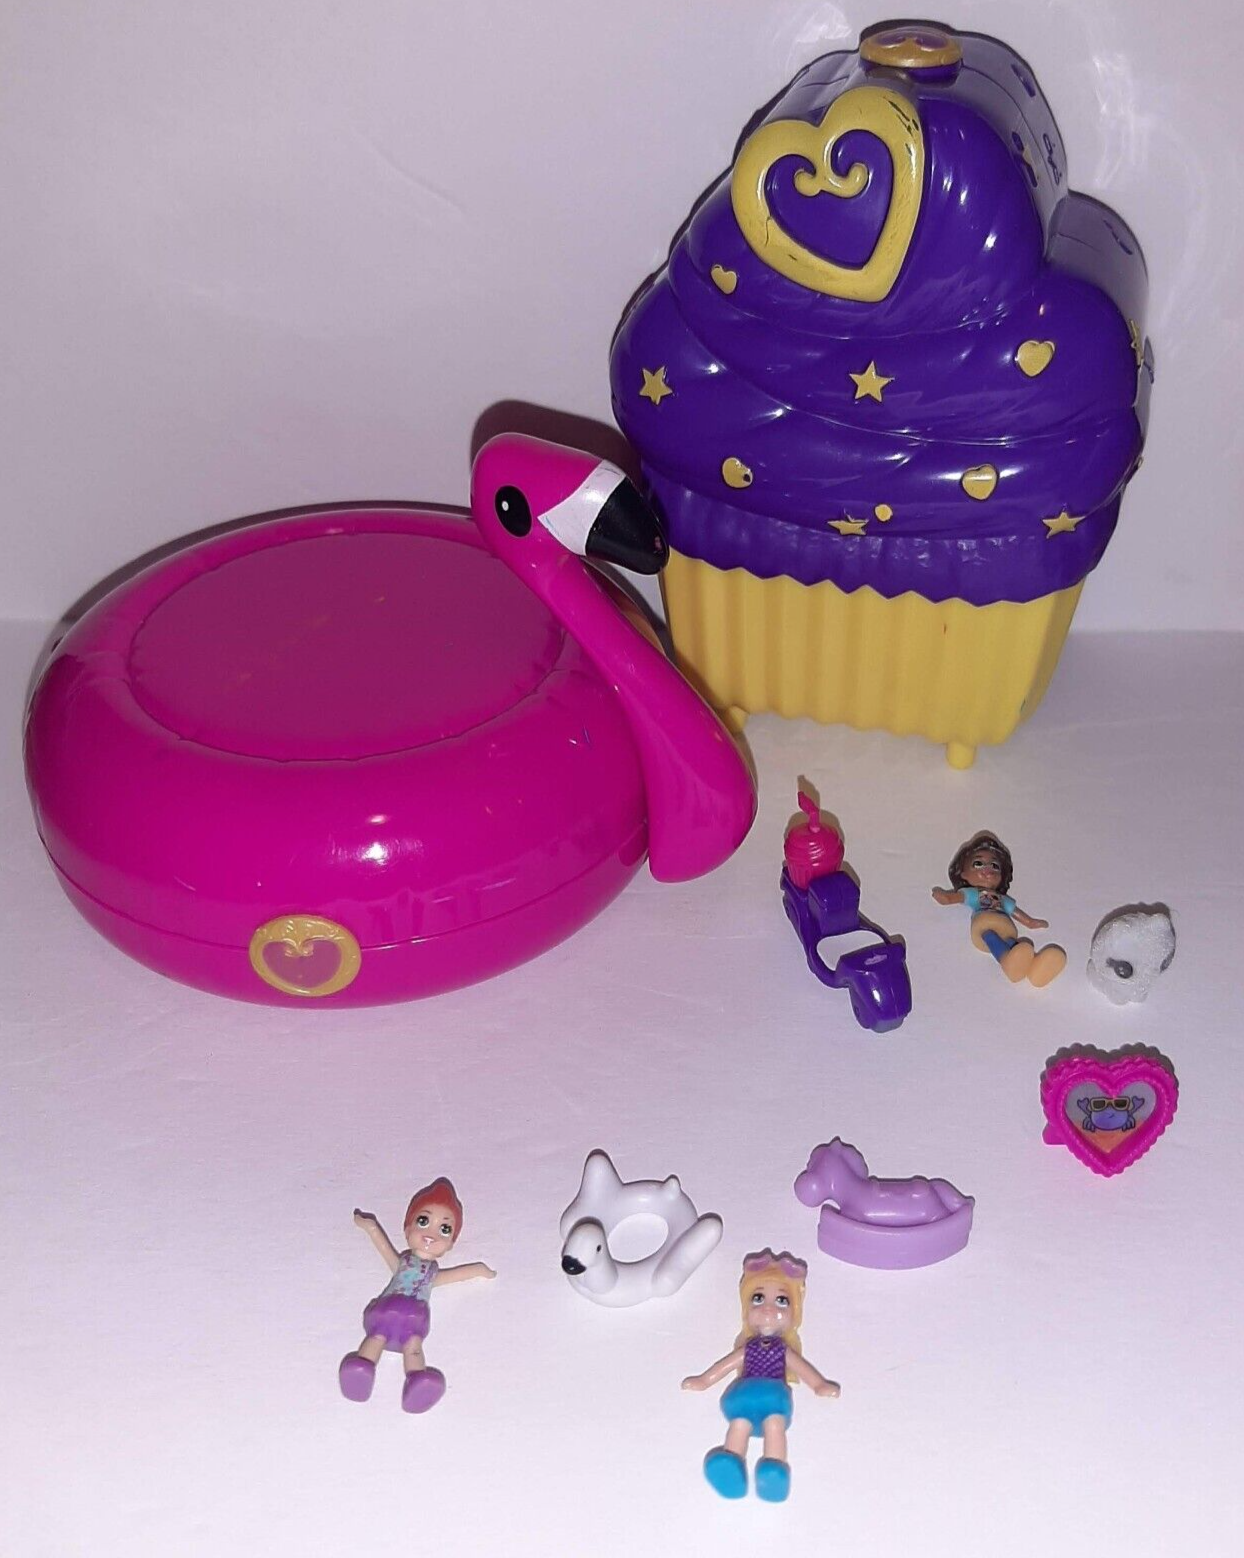 Polly Pocket Compact Pink Flamingo & Cupcake Sets w/Dolls & Accessories - $11.88